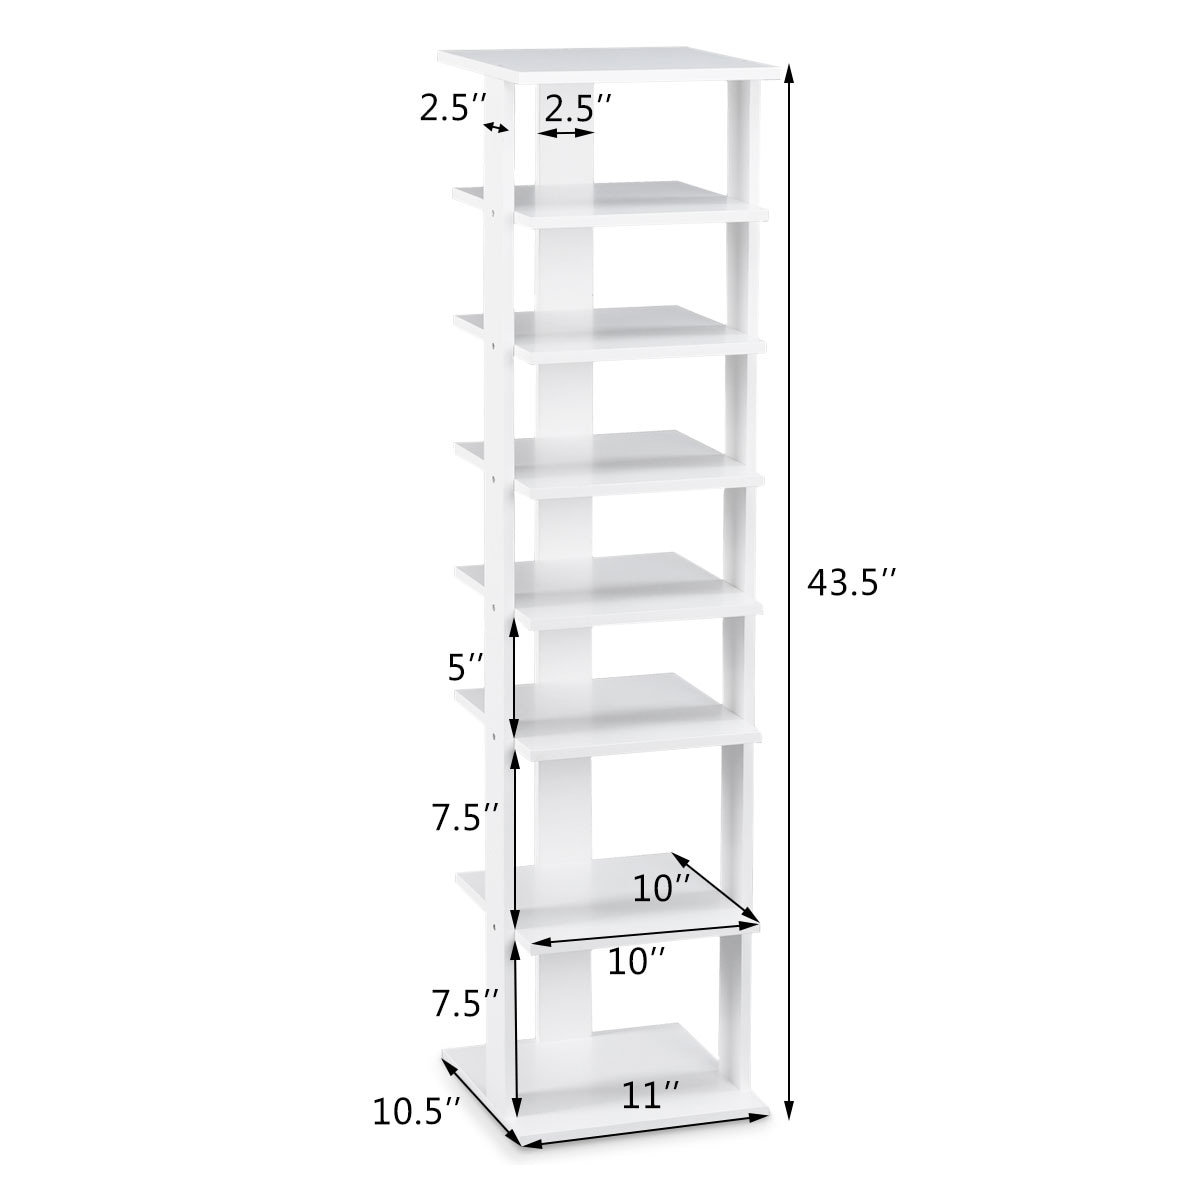 https://ak1.ostkcdn.com/images/products/is/images/direct/efa21424311602bac7d920b40a5b1b70f3d588ad/7-Tier-Compact-Shoe-Rack-Free-Standing-Storage-Organizer-Shelves.jpg